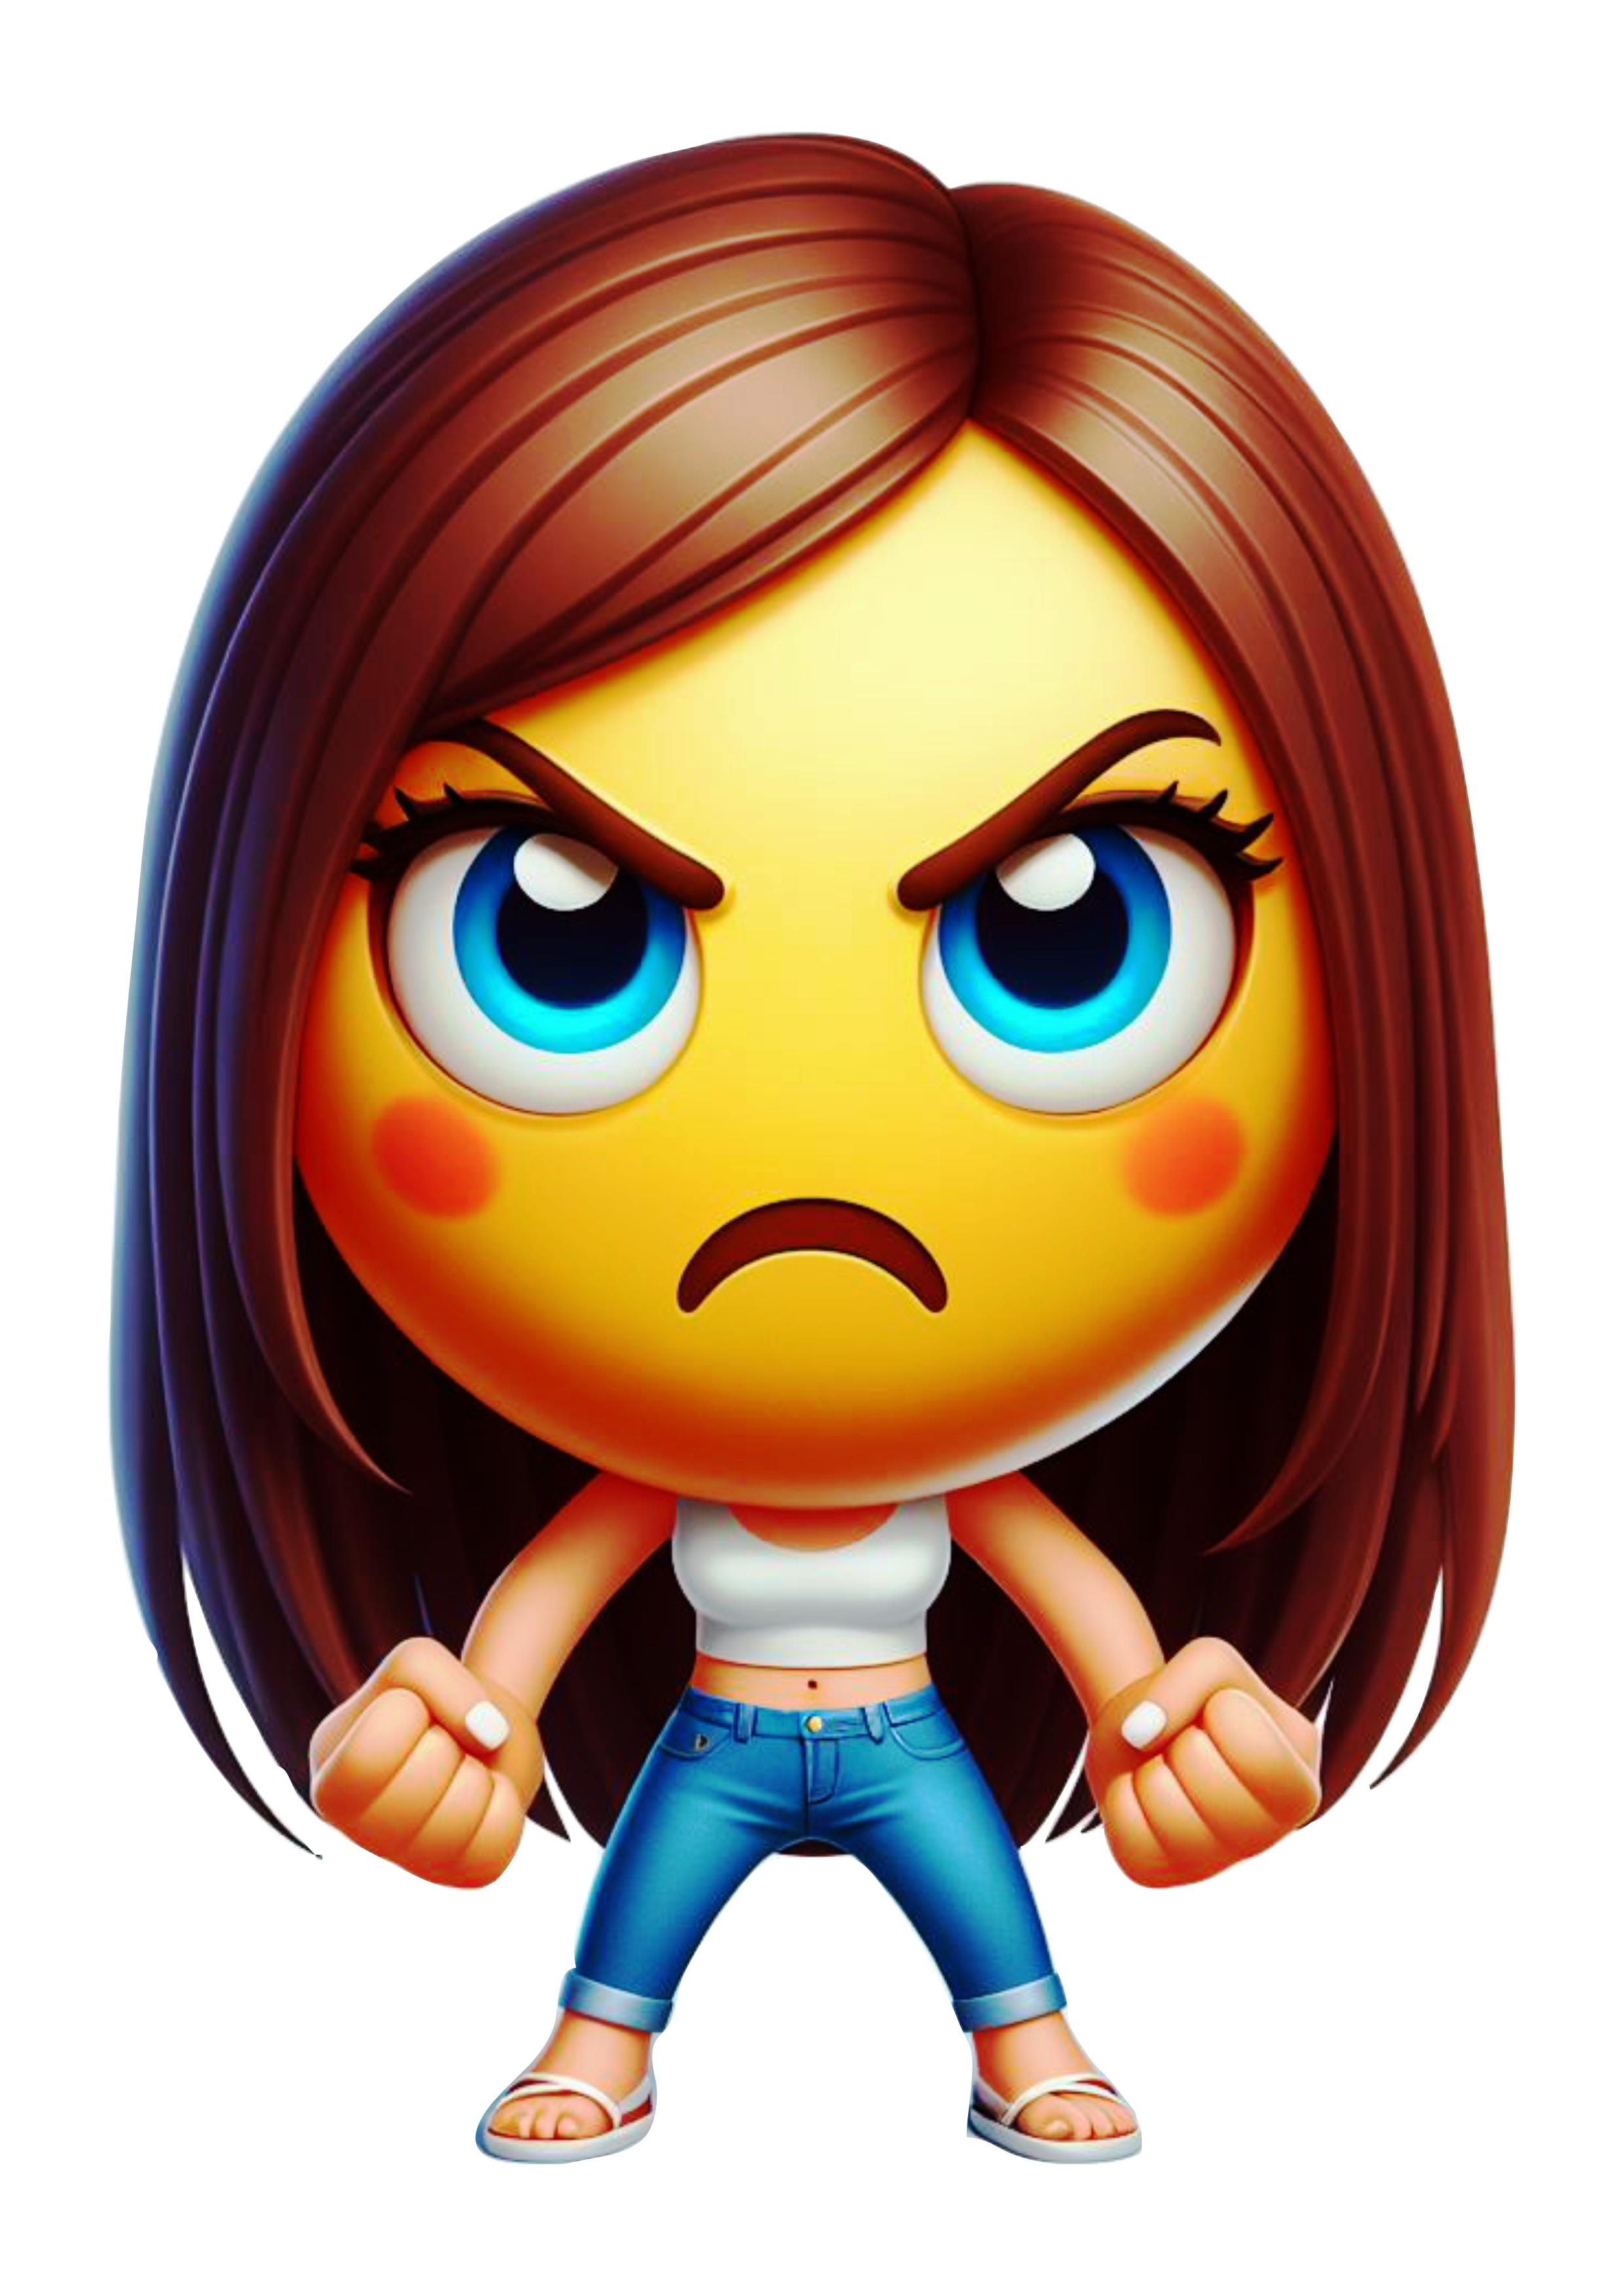 Emoticon Angry Woman Emojis Free PNG Transparent Background